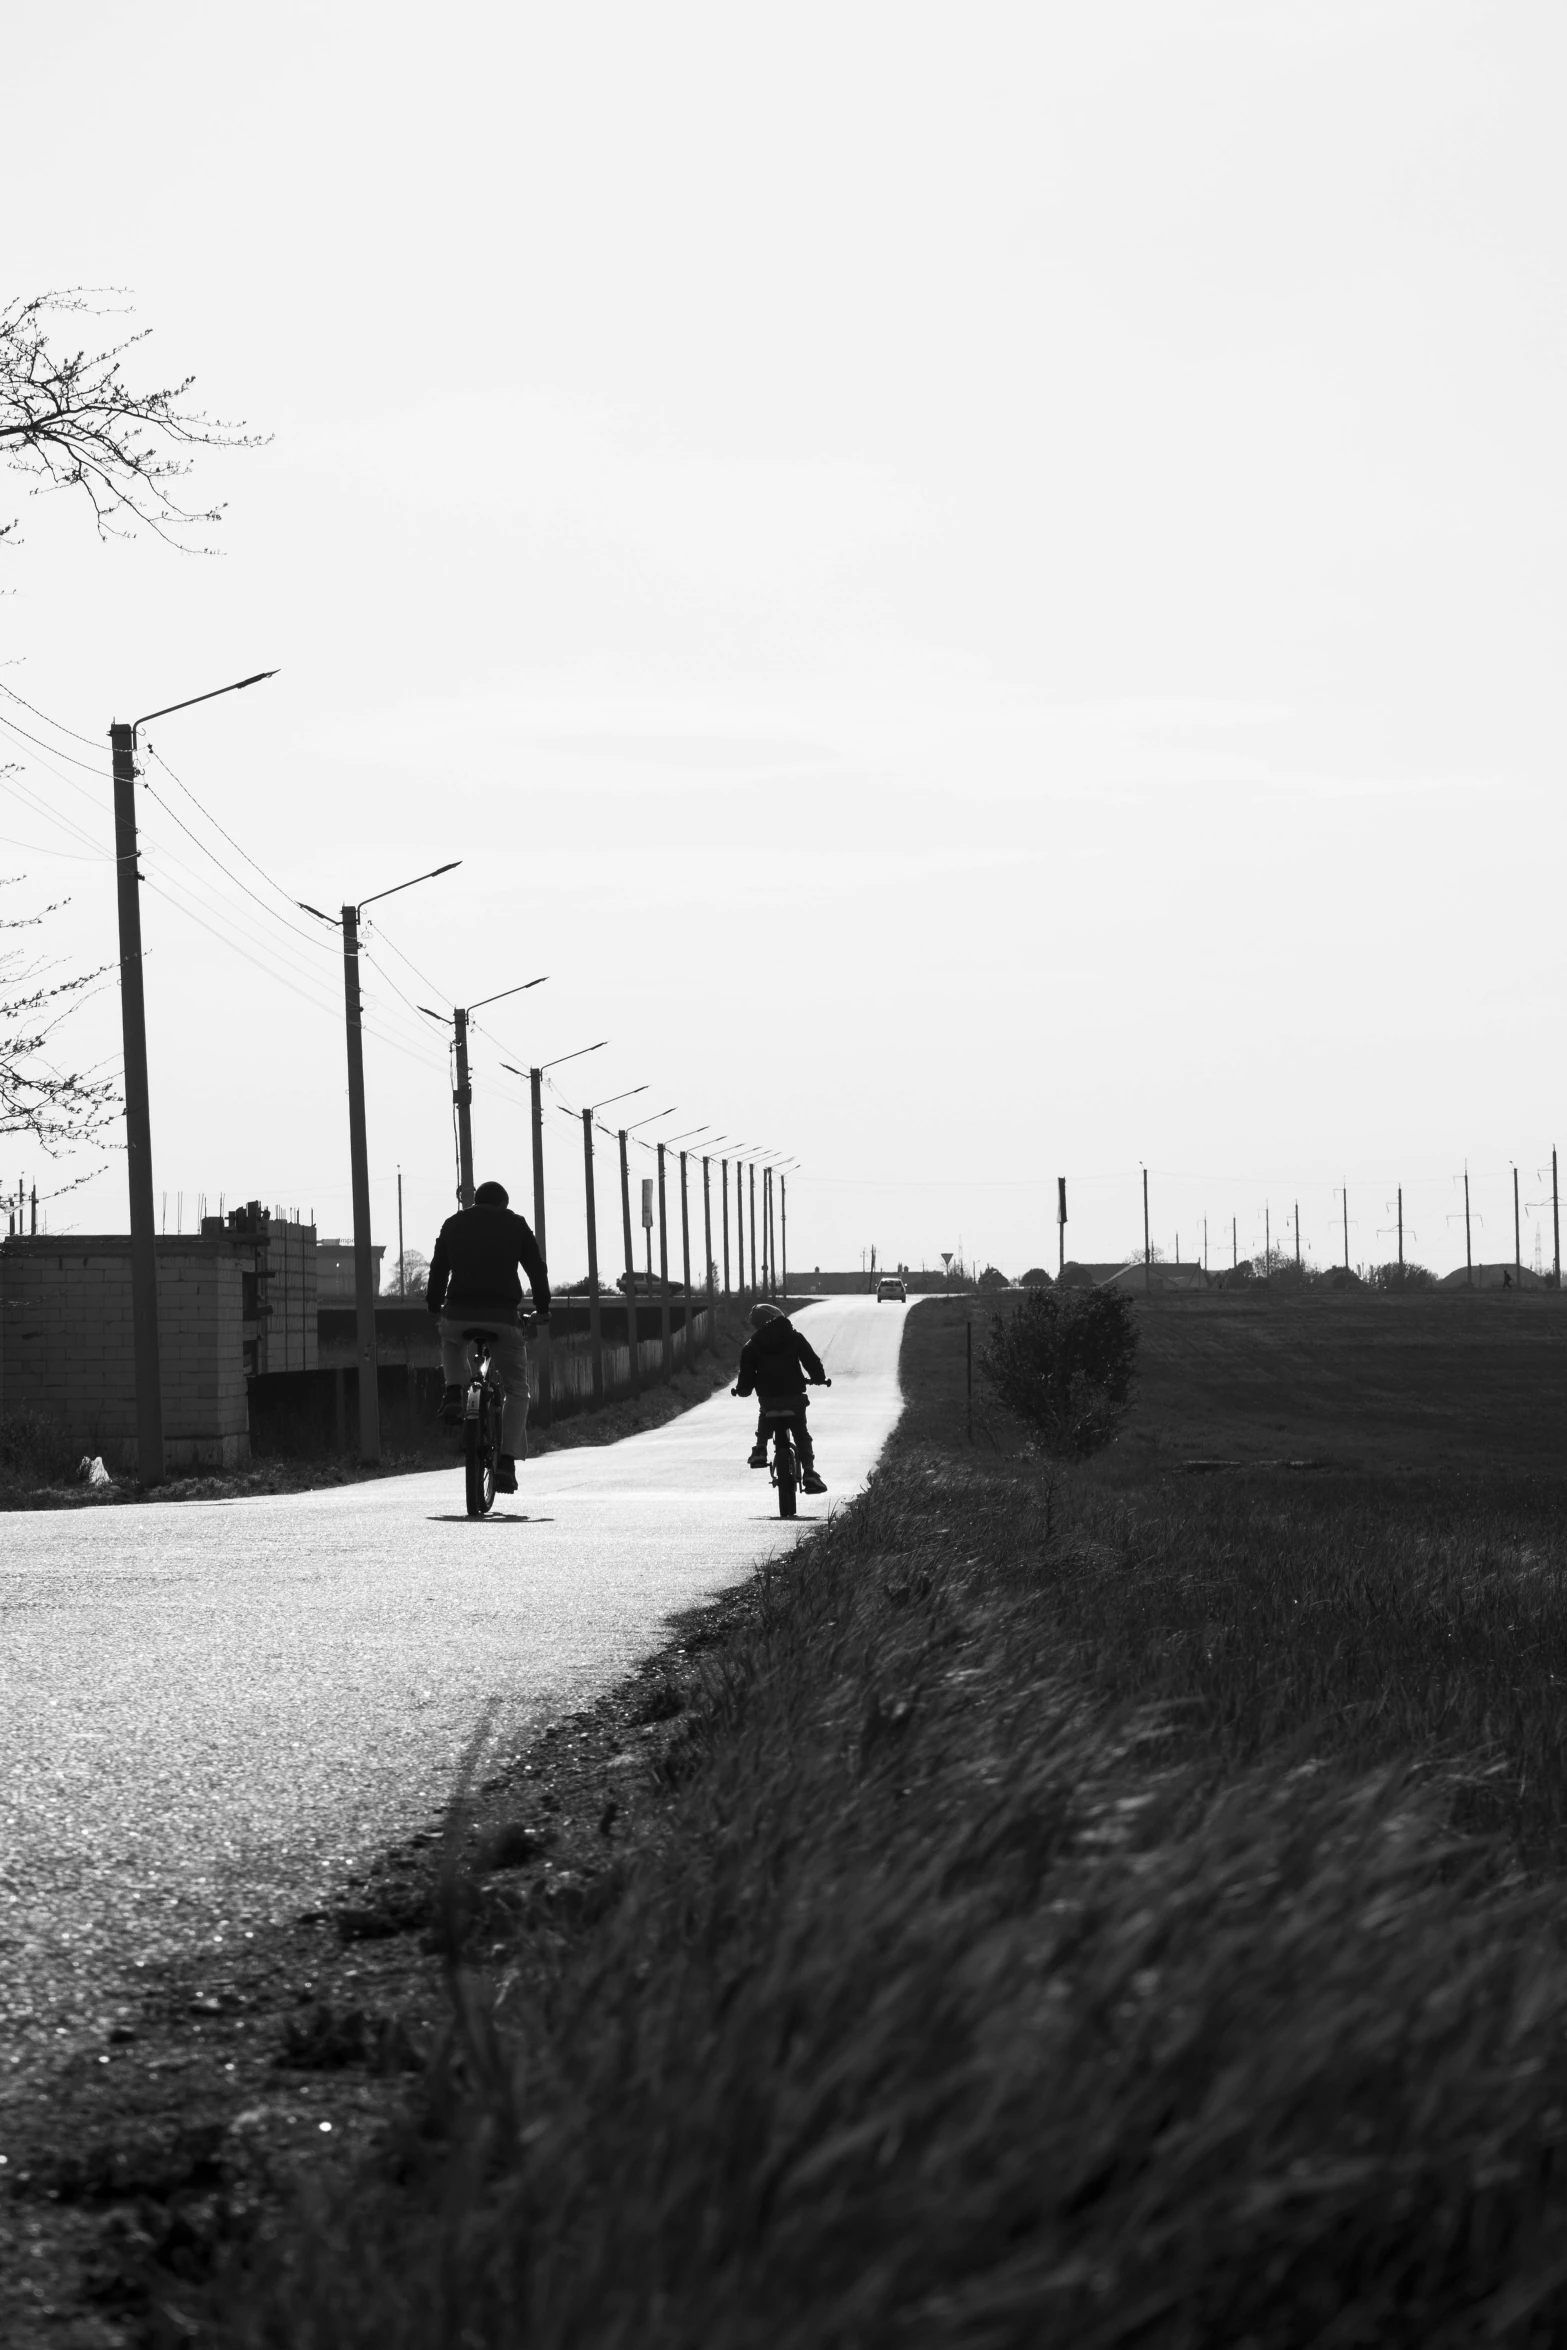 a black and white photo of a person on a skateboard, a black and white photo, by Jacob Toorenvliet, conceptual art, roads among fields, powerlines, cycling!!, low quality photograph